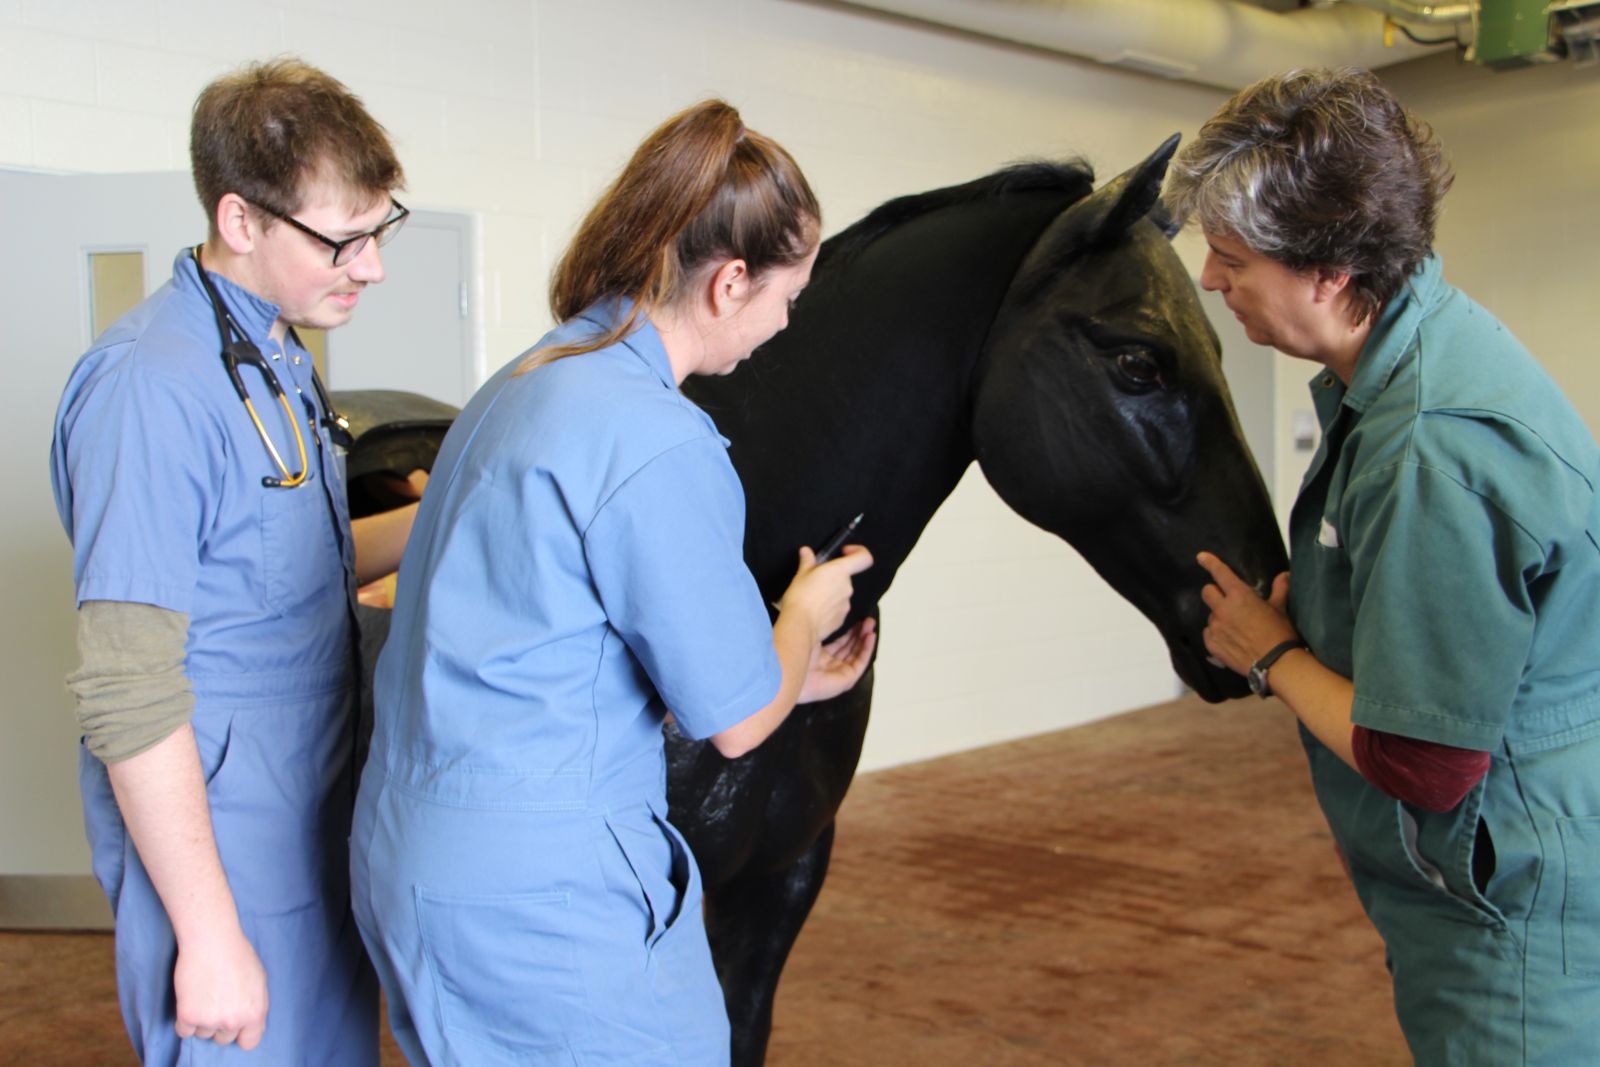 Ontario Veterinary College DVM students work with a new high-tech horse model